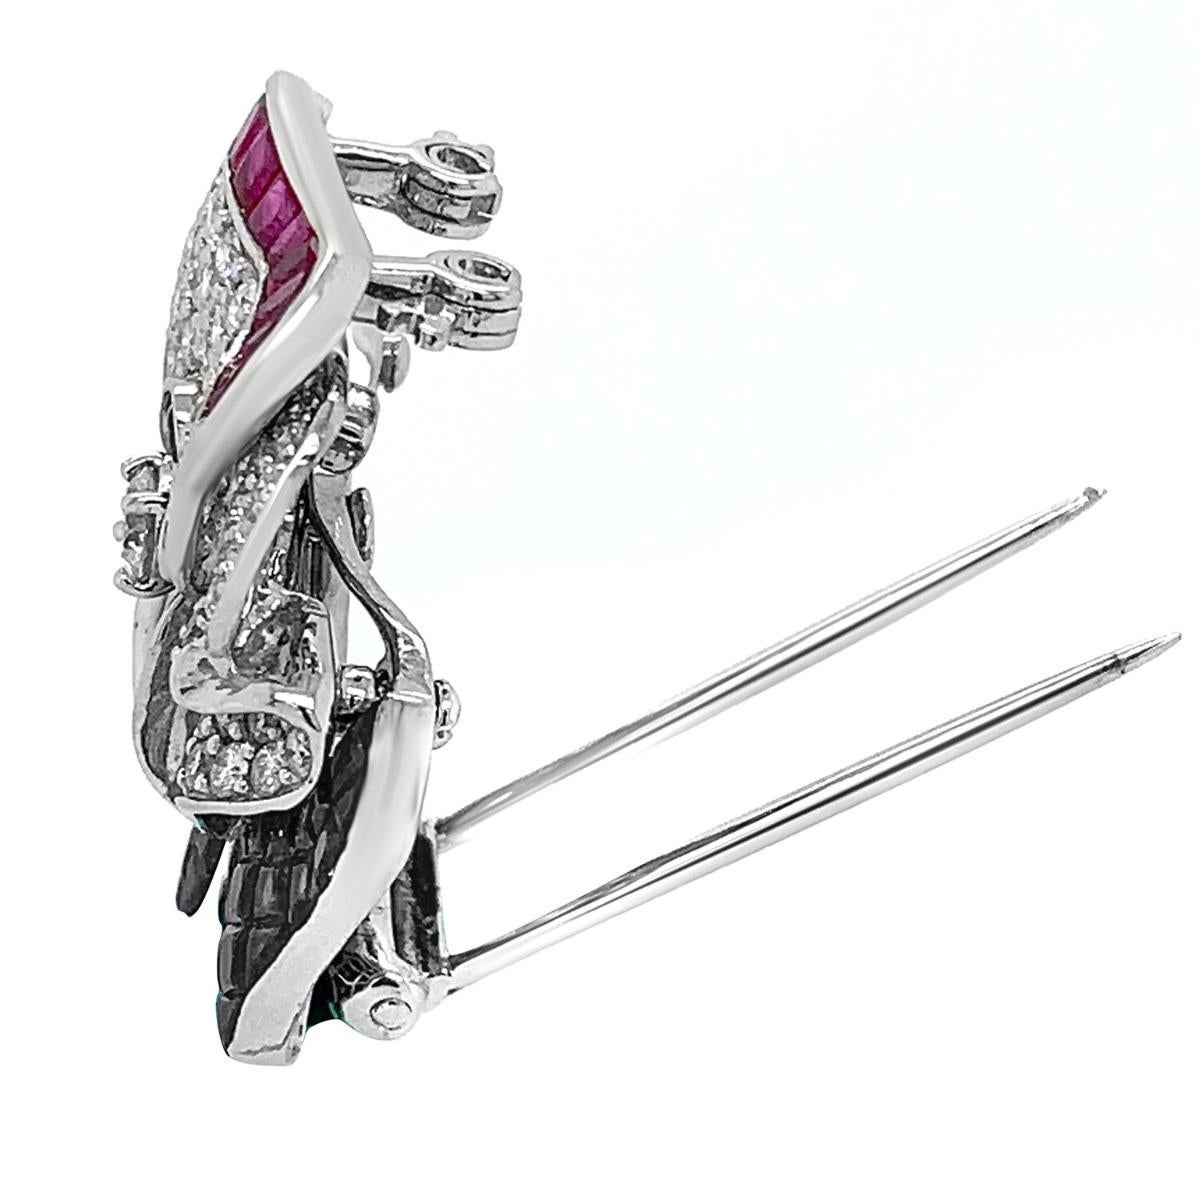 18k White Gold Fancy Ruby Diamond Brooch 

Metal: 18k White Gold 
Condition: Excellent
Gemstone: Ruby, Diamond
Item Weight: 12.8 grams
Length: 1 inch
Width: 1 inch

SKU#PB-01515